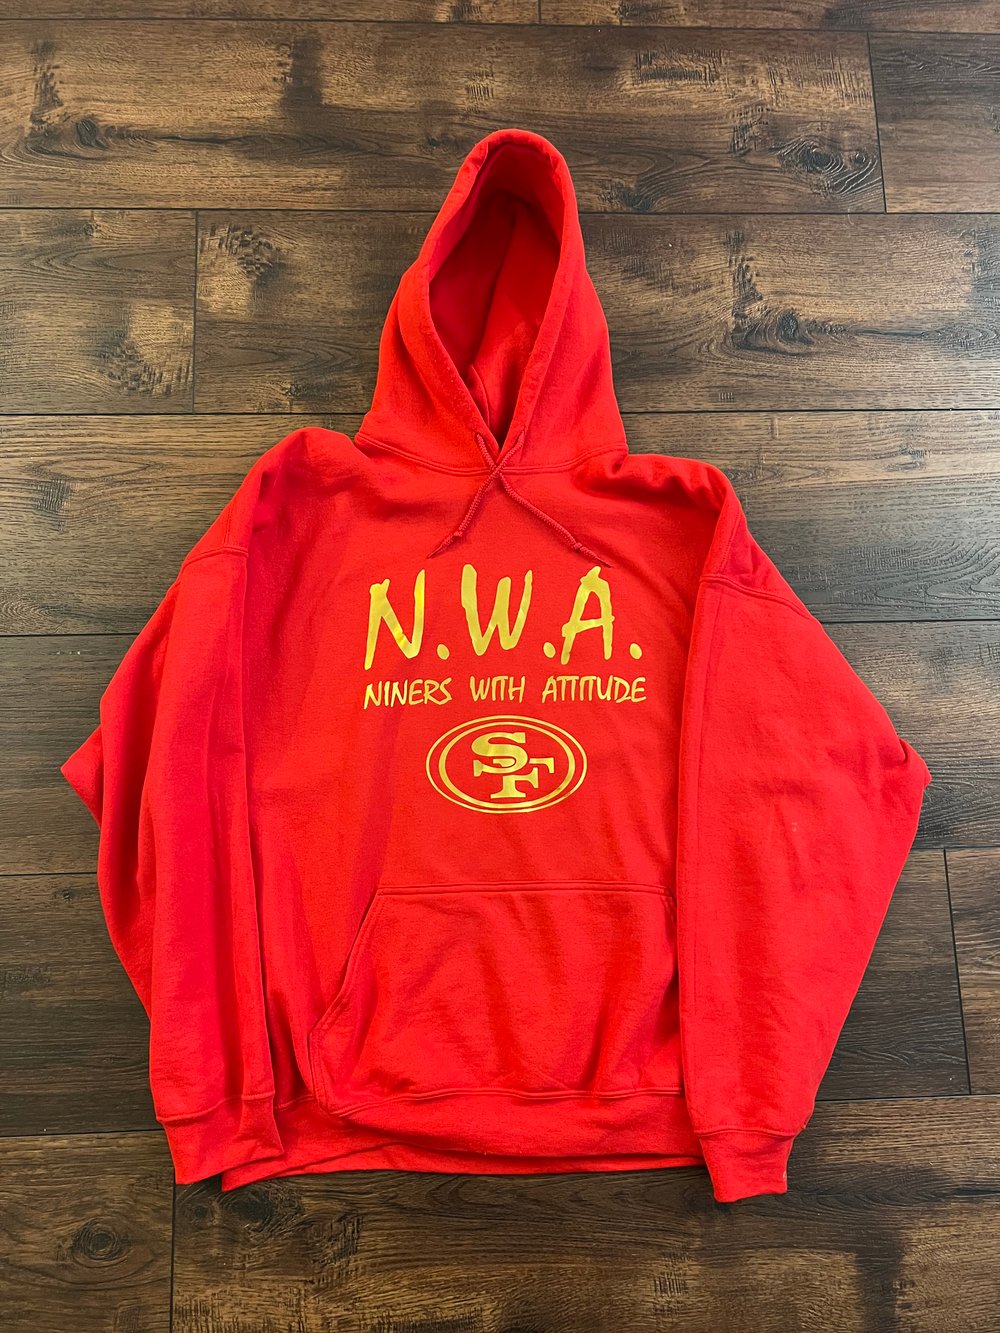 N.W.A. RED HOODIE, METALLIC GOLD LETTERS